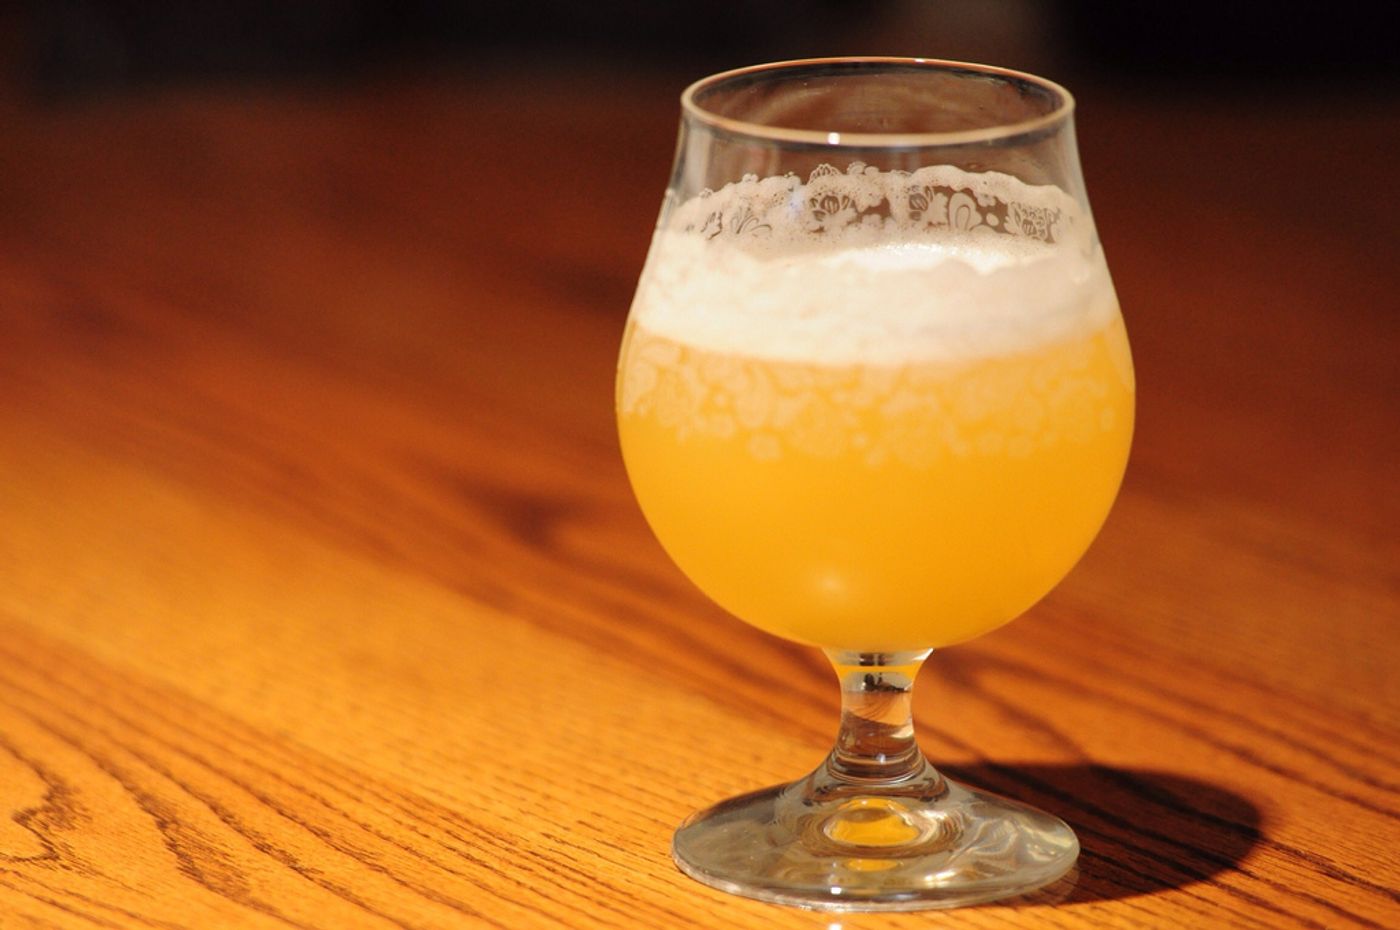 Sour beer, an acquired taste?